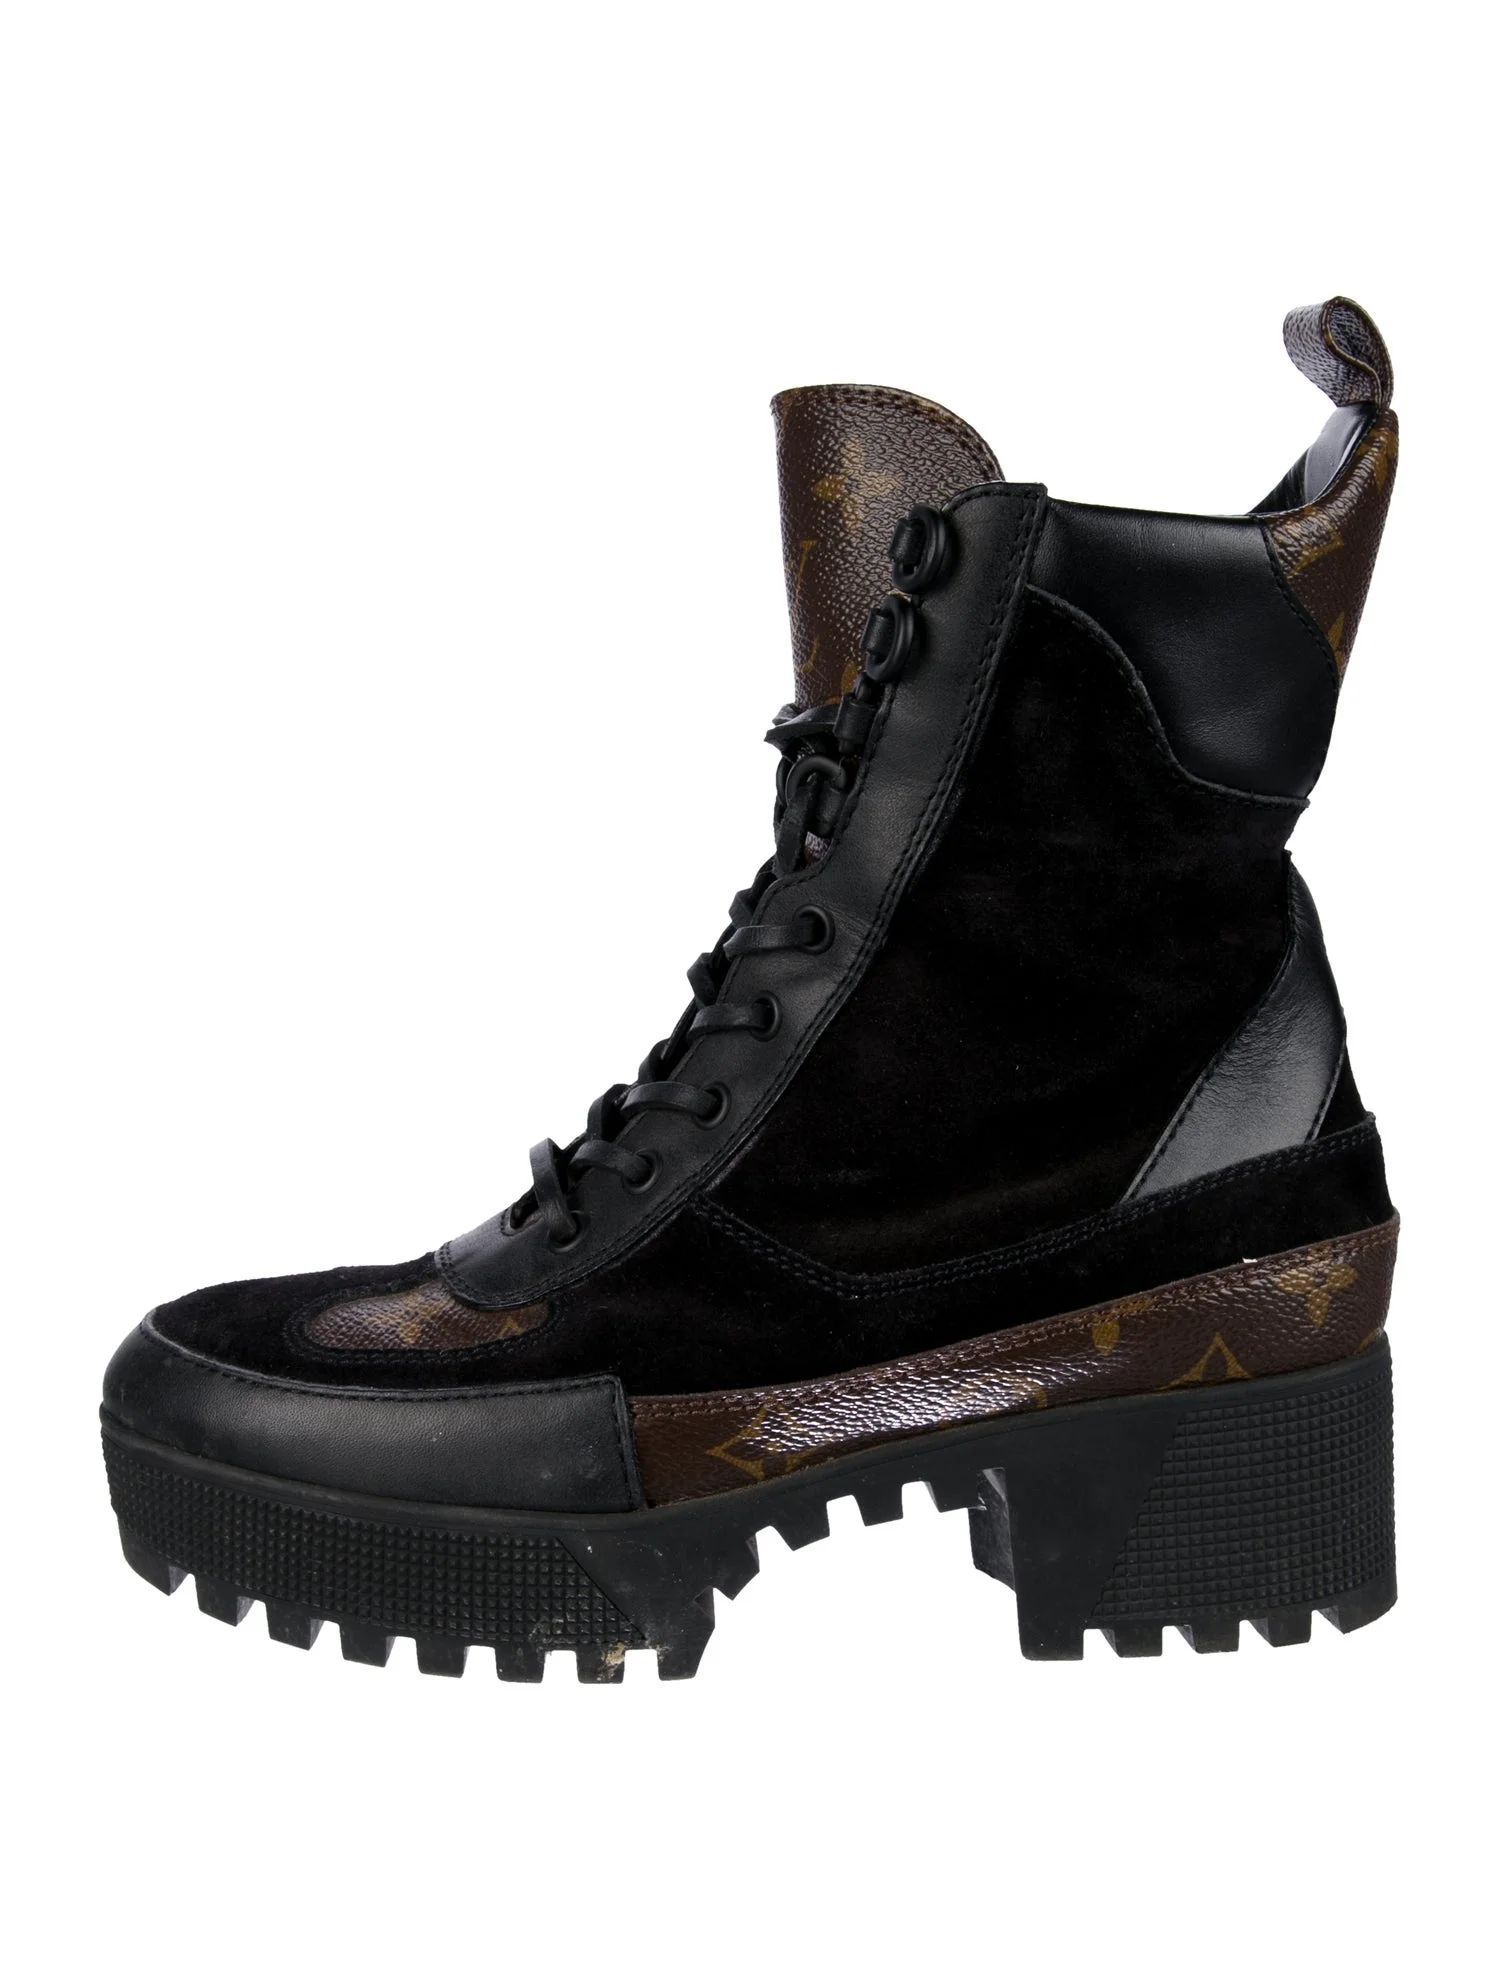 LV Monogram Suede Lace-Up Boots | The RealReal